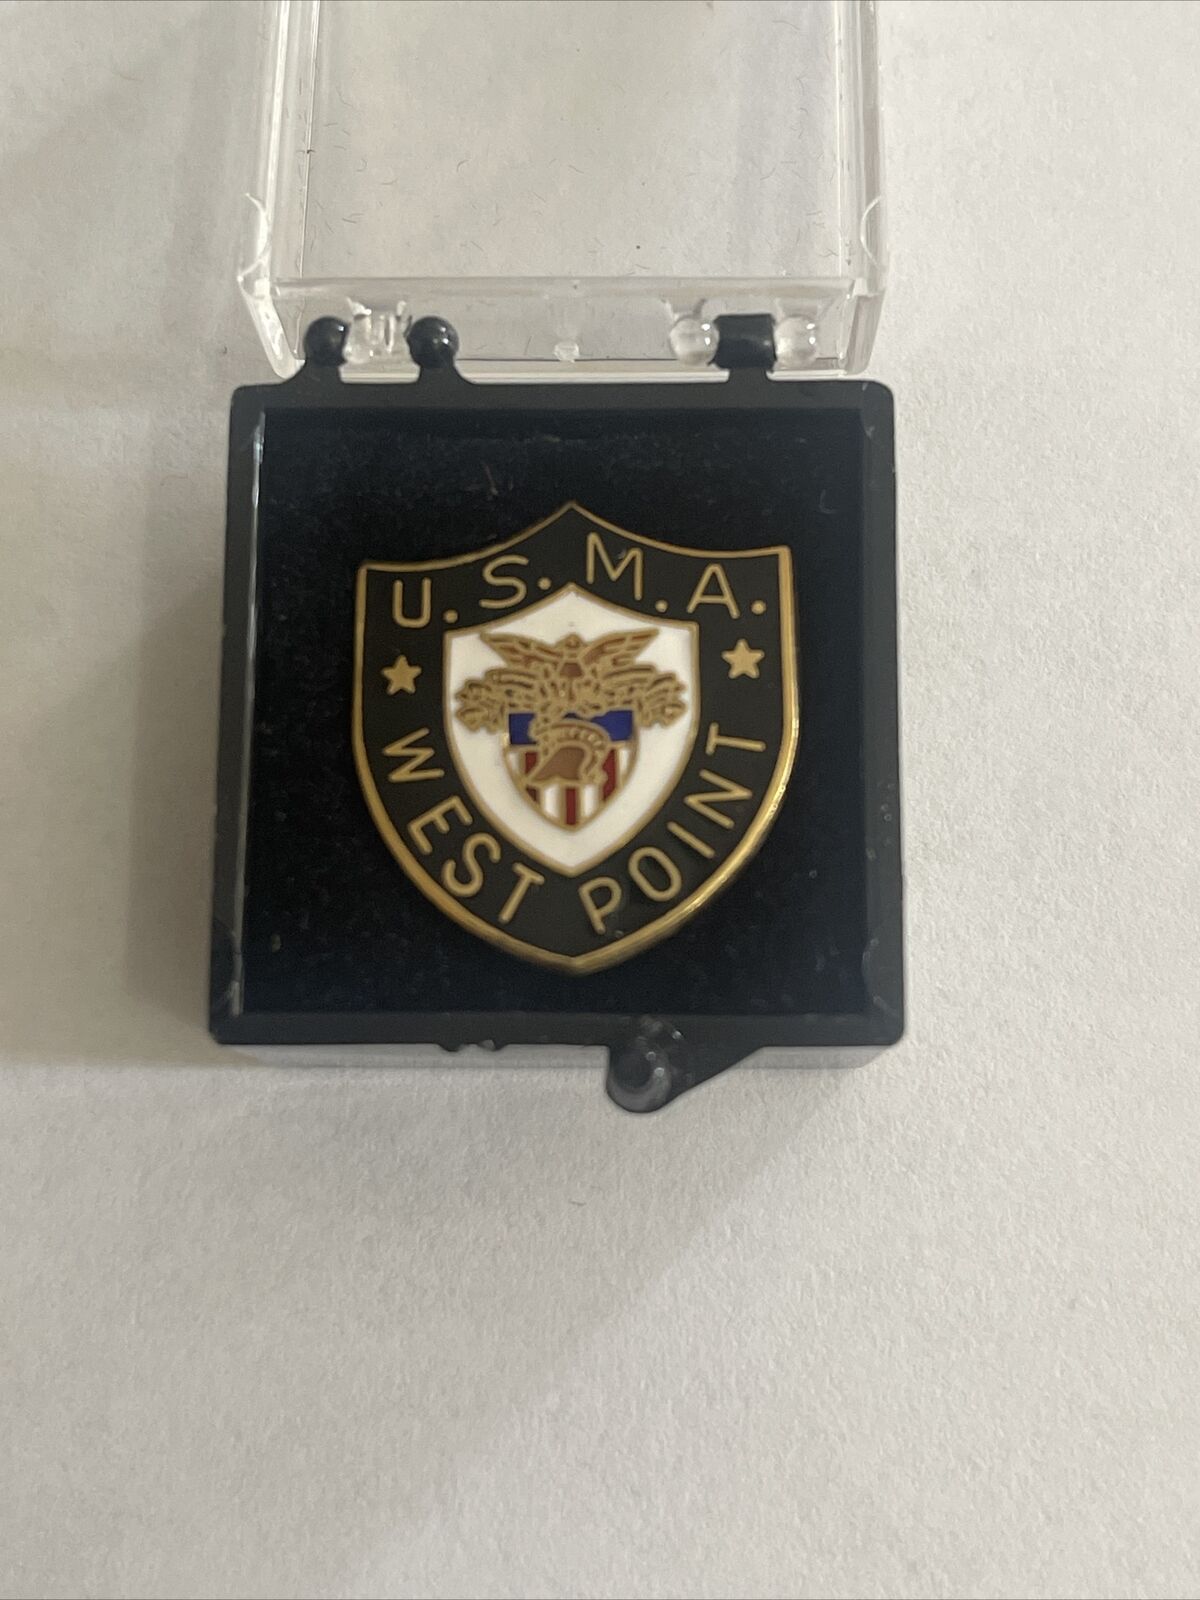 ARMY USMA WEST POINT CREST - SHIELD LAPEL PIN